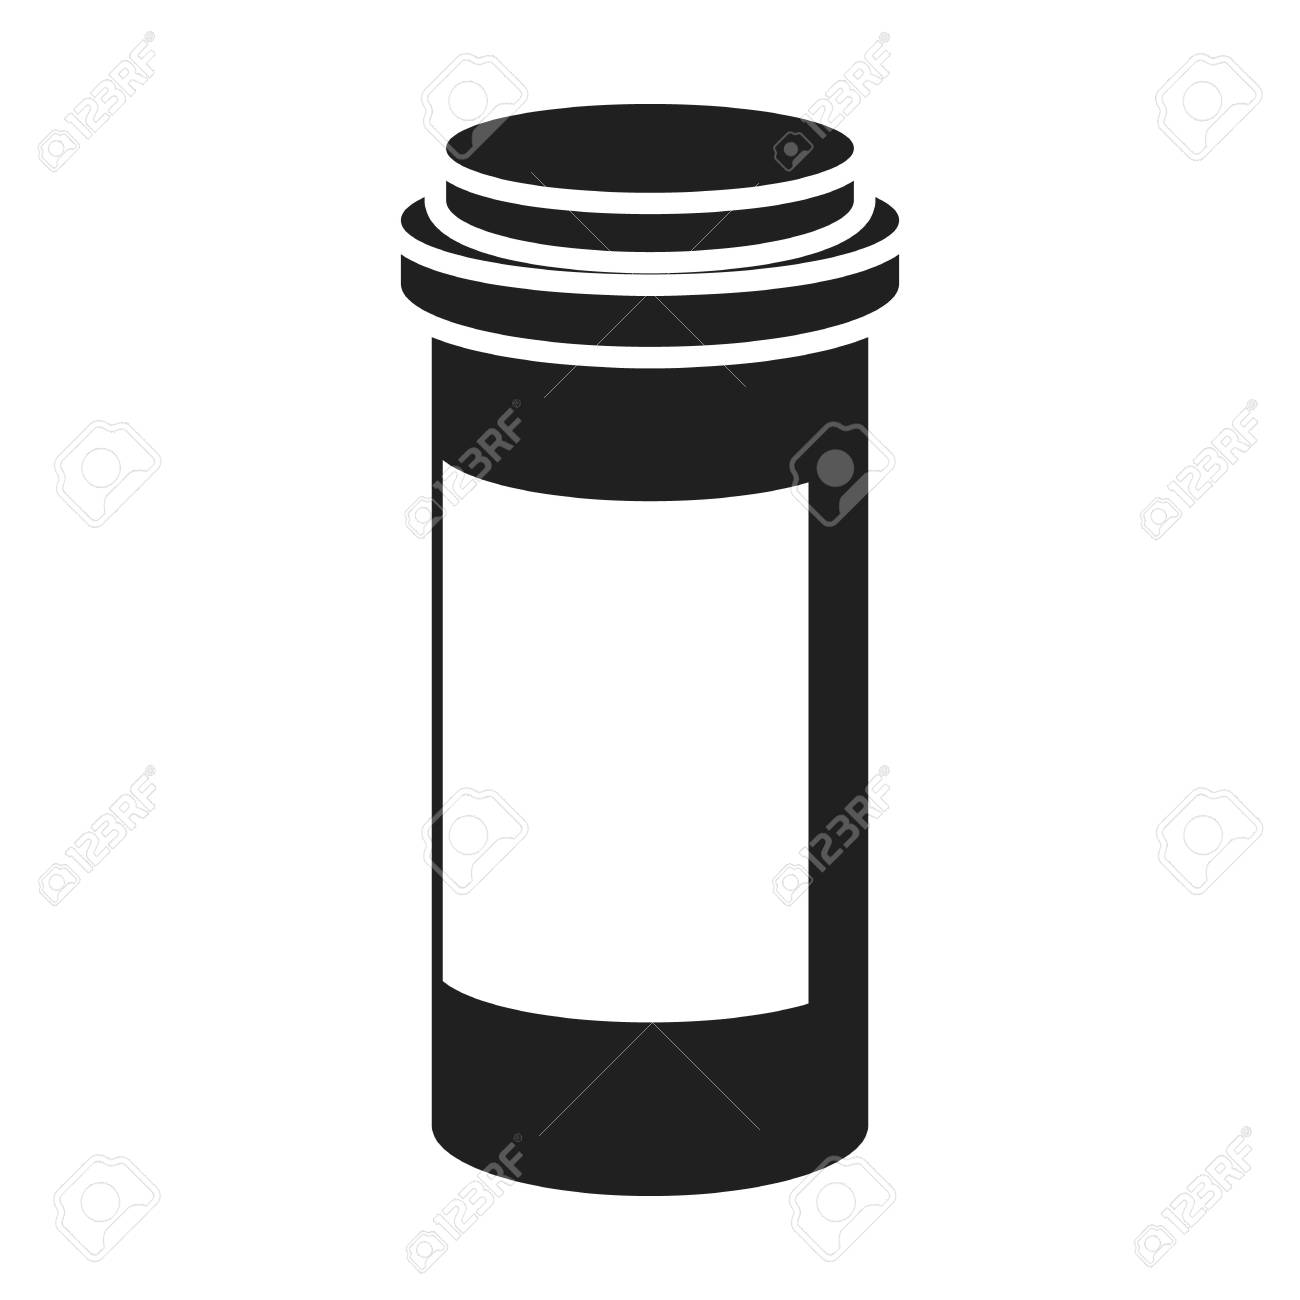 Prescription Bottle Icon In Black Style Isolated On White